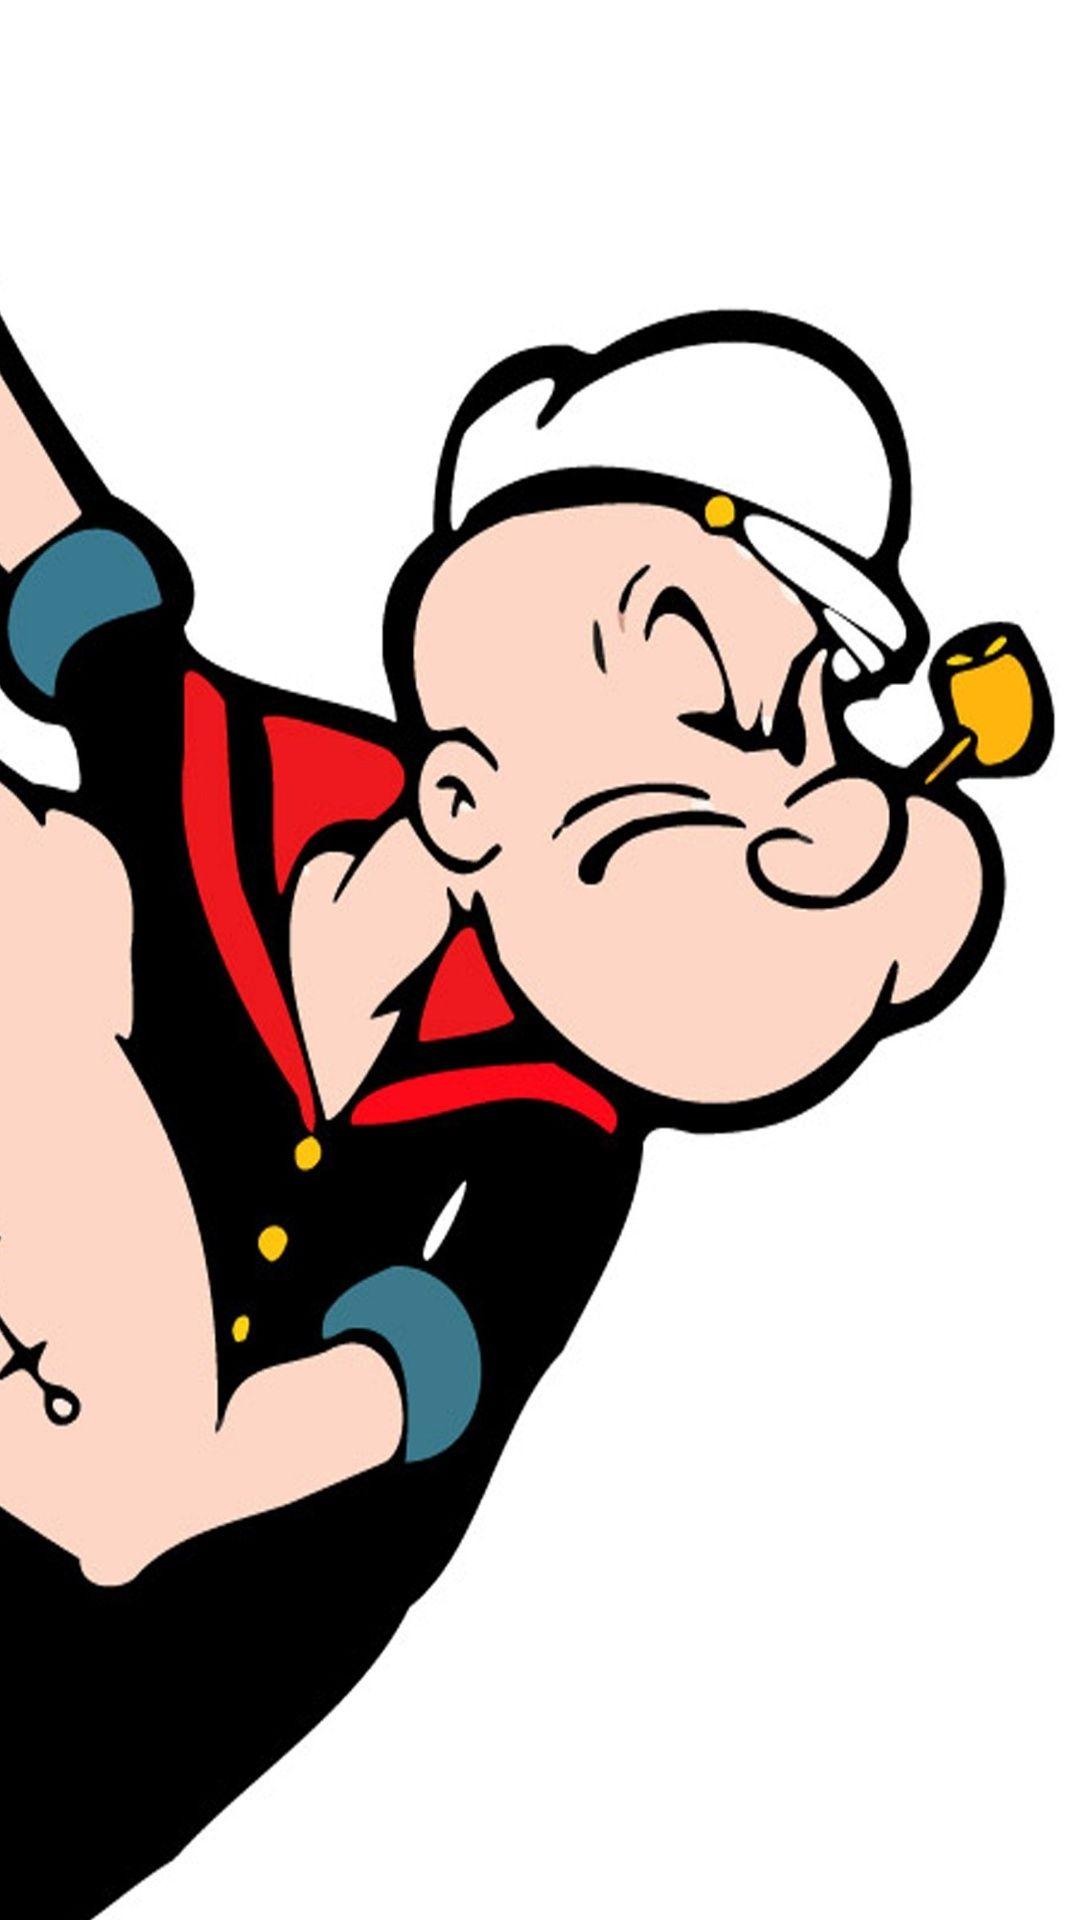 Widescreen Popeye 2K Mobile On Download Wallpapers Pf Cartoon High